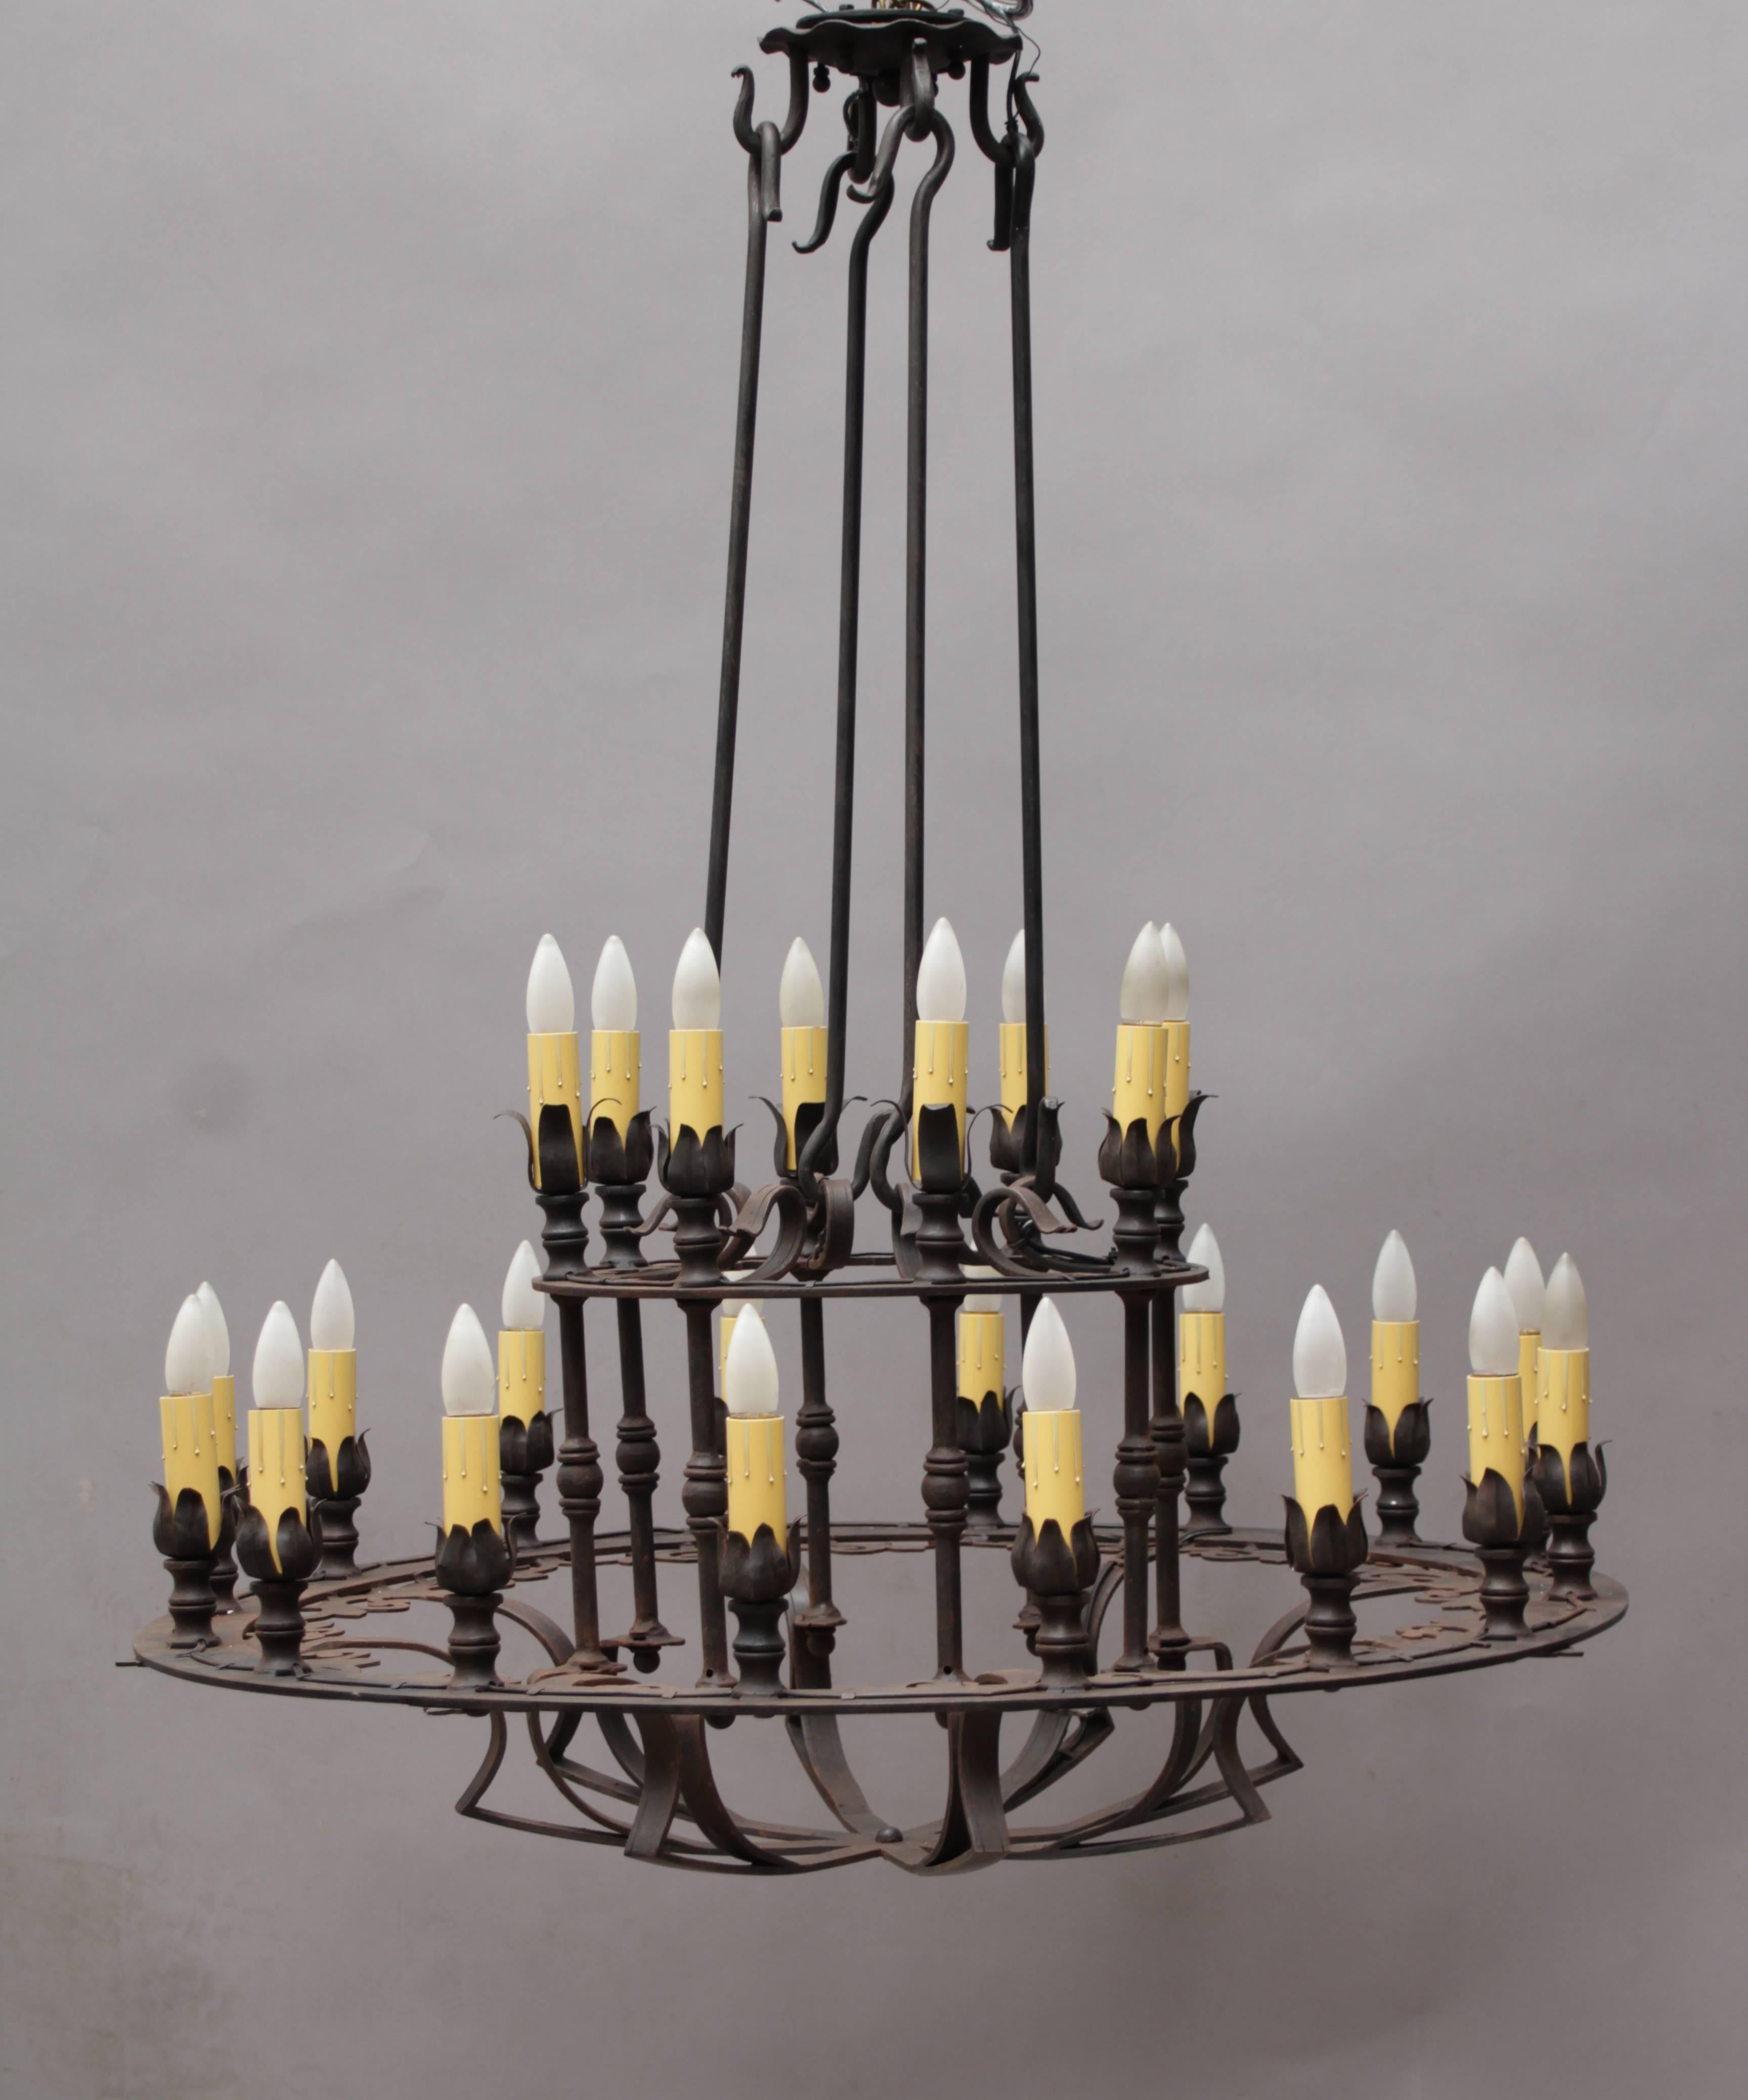 Two-tiered large-scale wrought iron chandelier with incised detailing.